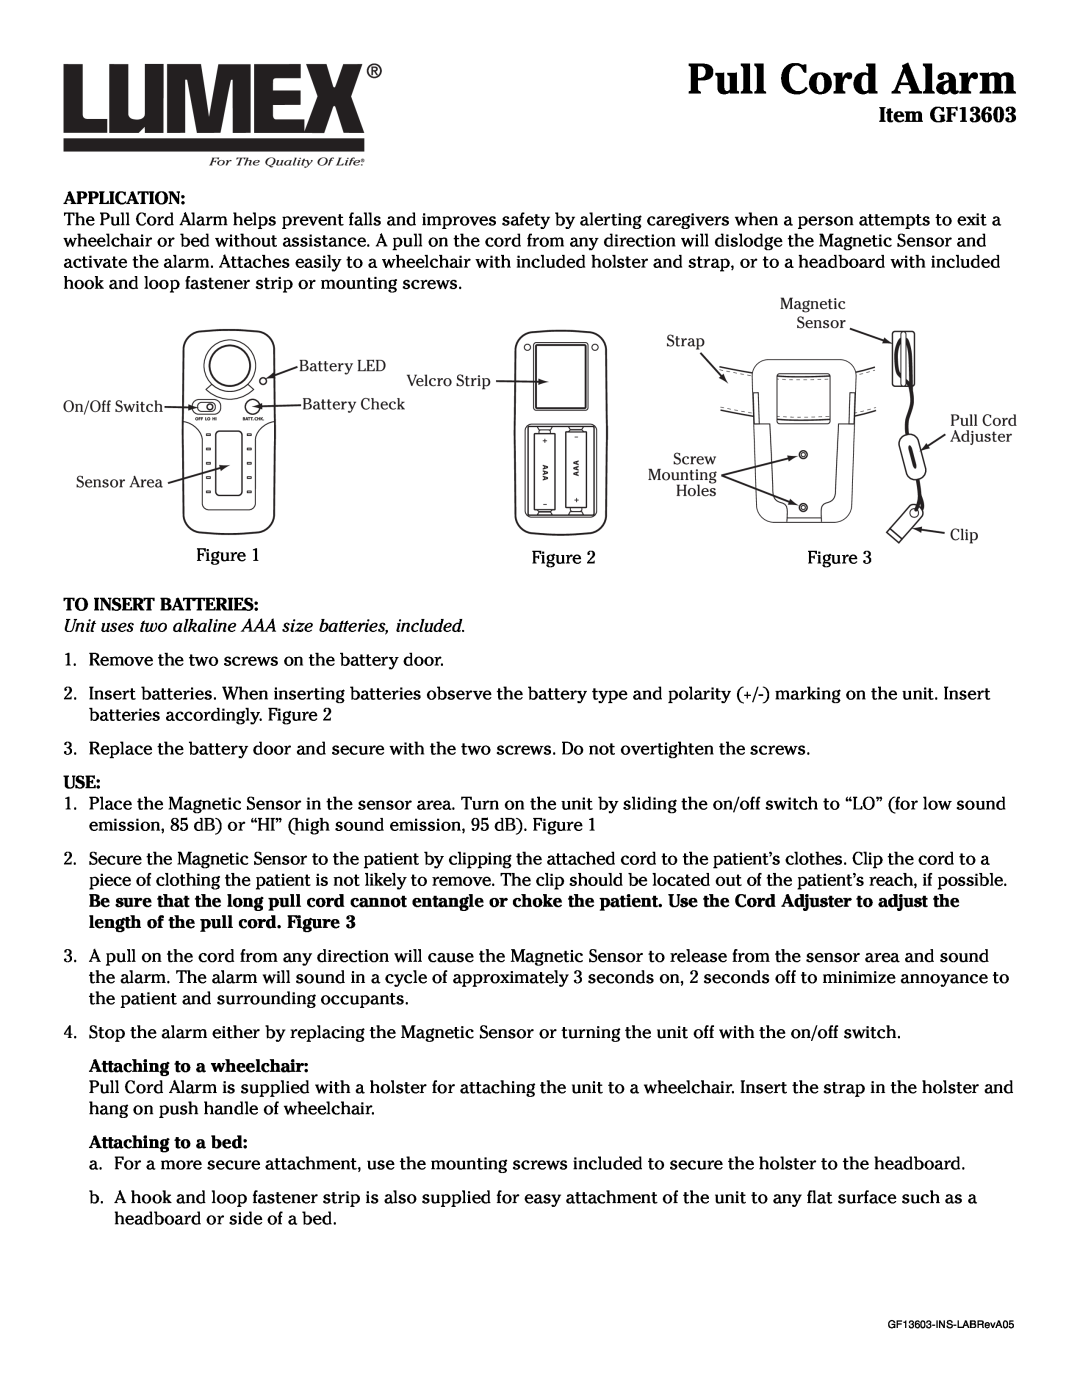 Graham Field manual Item GF13603, Application, To Insert Batteries, Attaching to a wheelchair, Attaching to a bed 